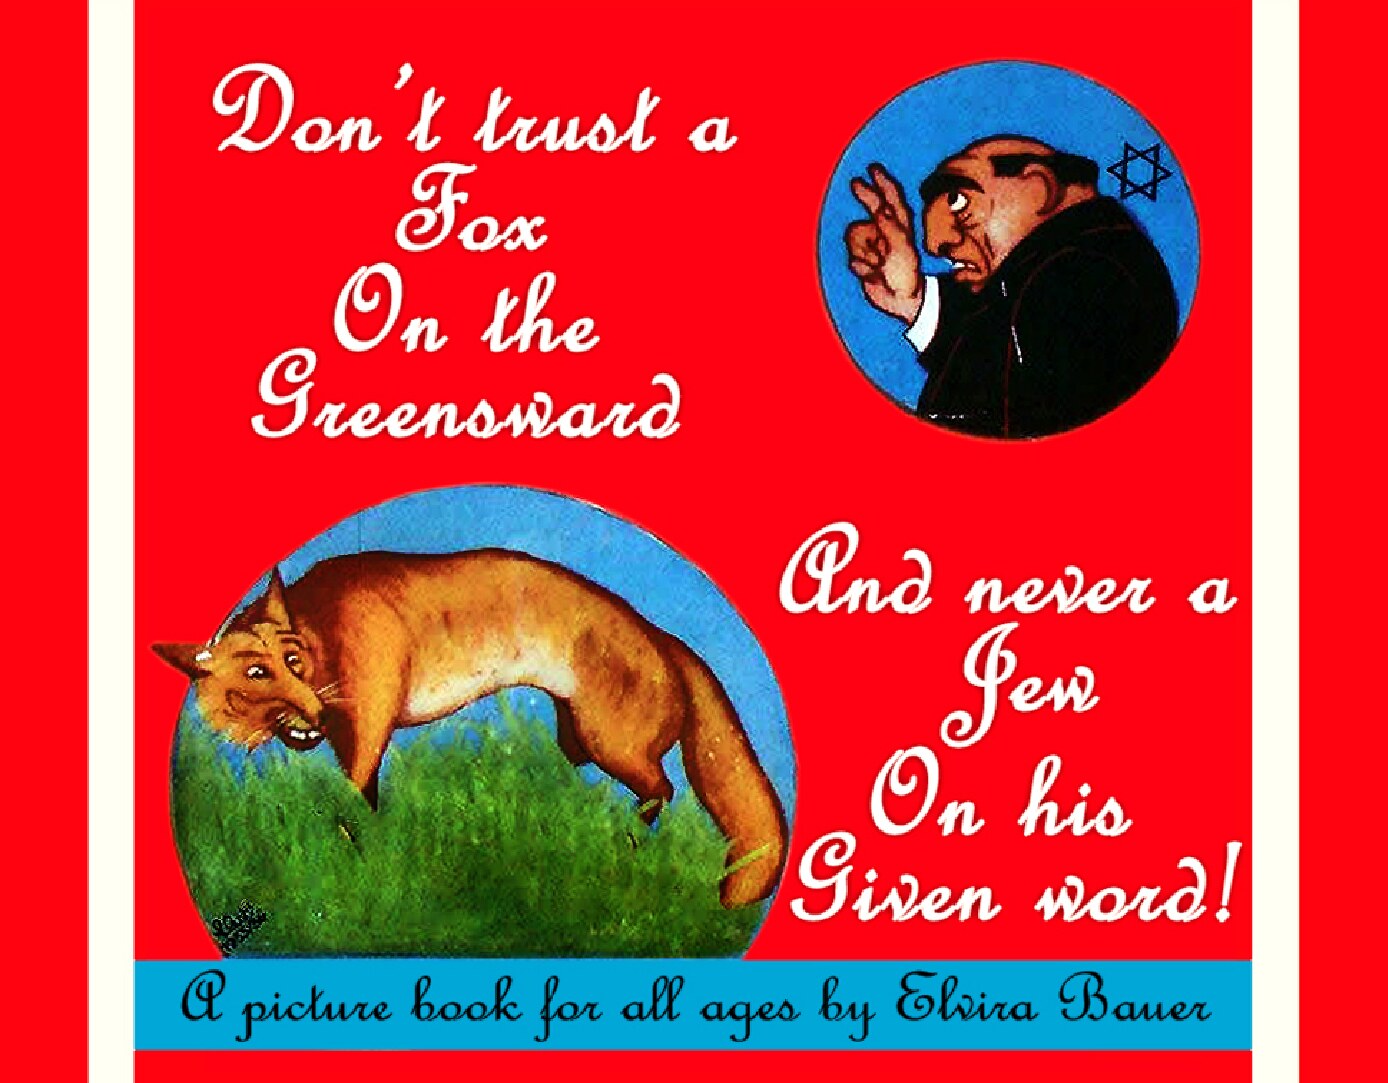 Don't trust a fox on a greensward, and never a Jew on his given word